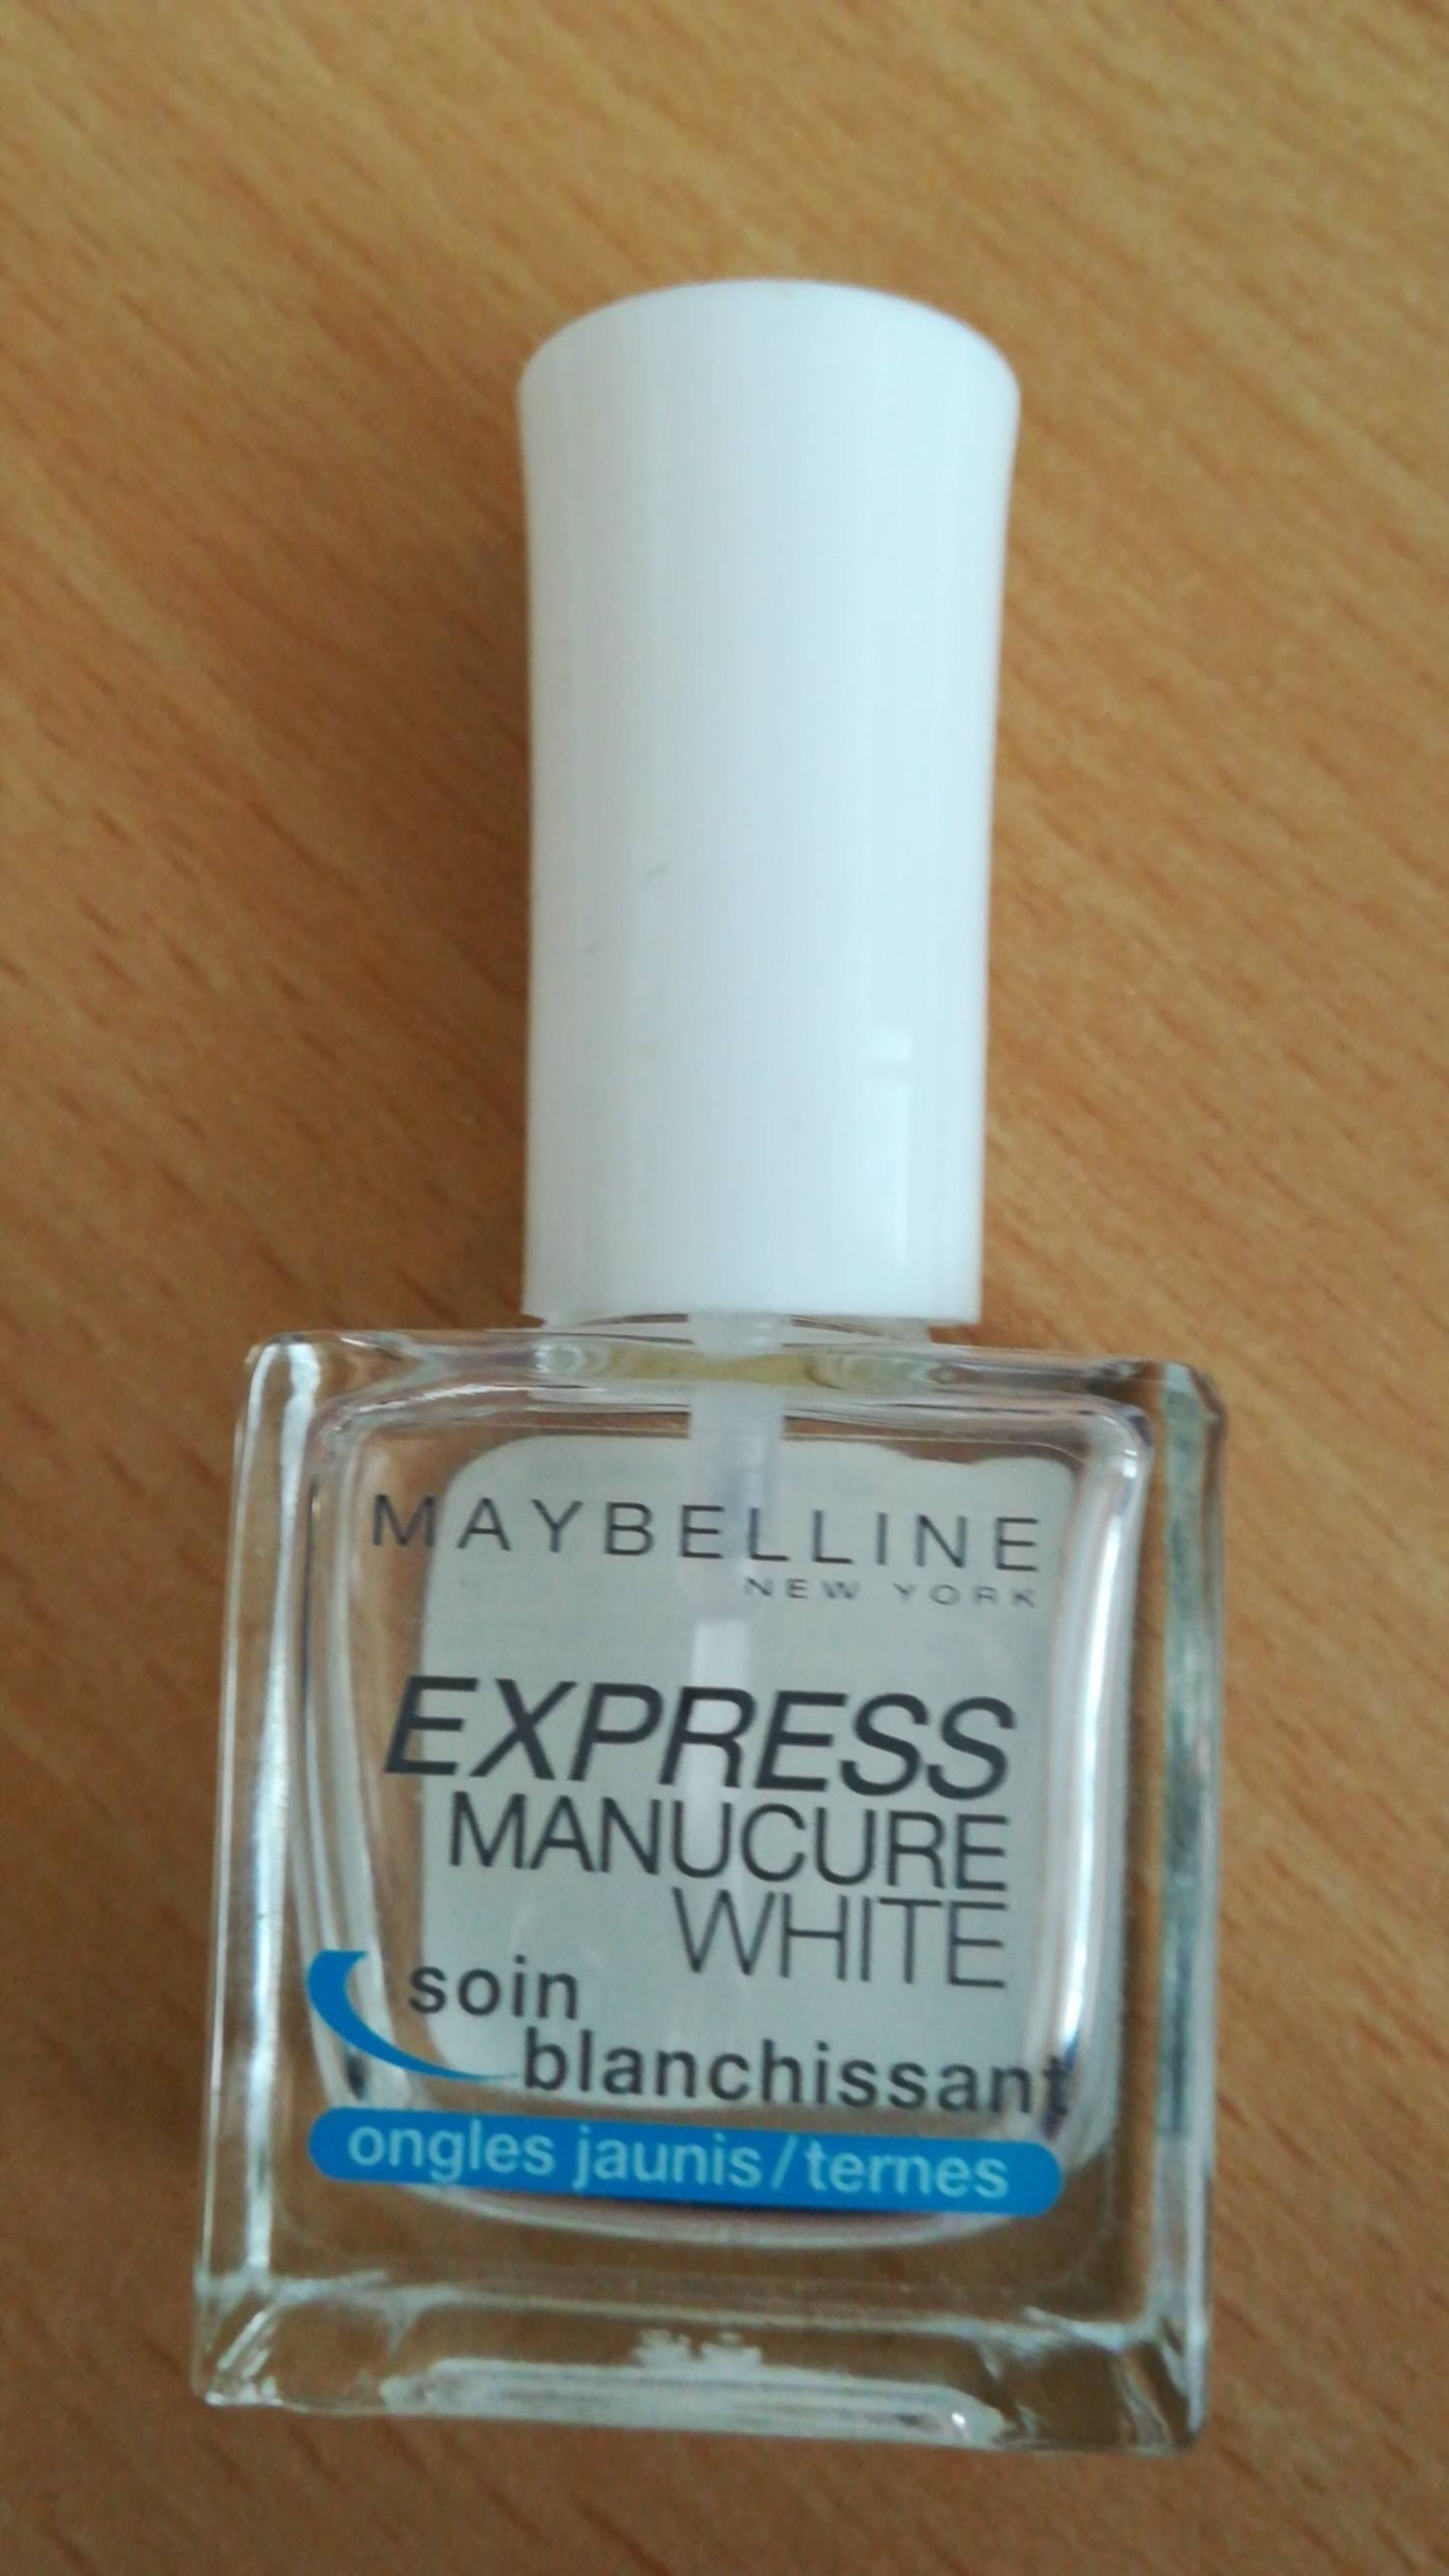 MAYBELLINE - Express Manucure White - Soin blanchissant